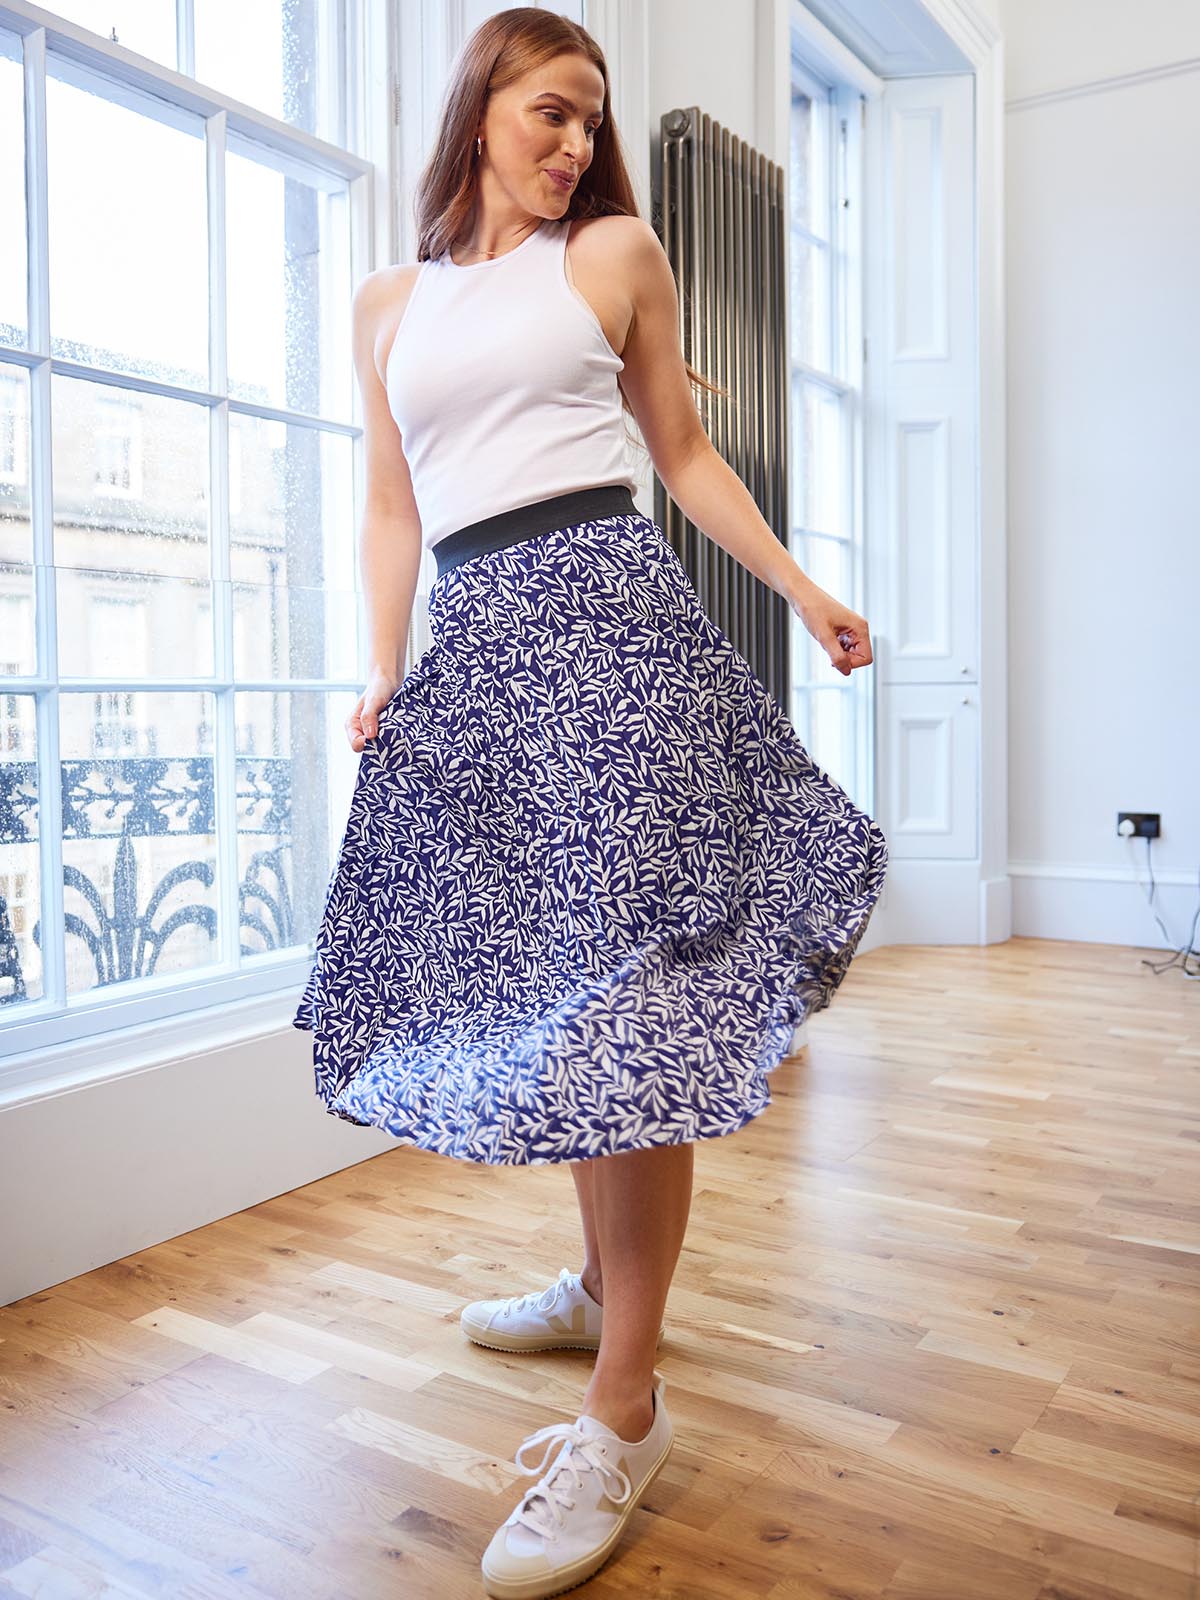 A model wearing the Gill sustainable skirt in navy and a white vest top, pictured in a well lit room in front of a large window and swishing the skirt.